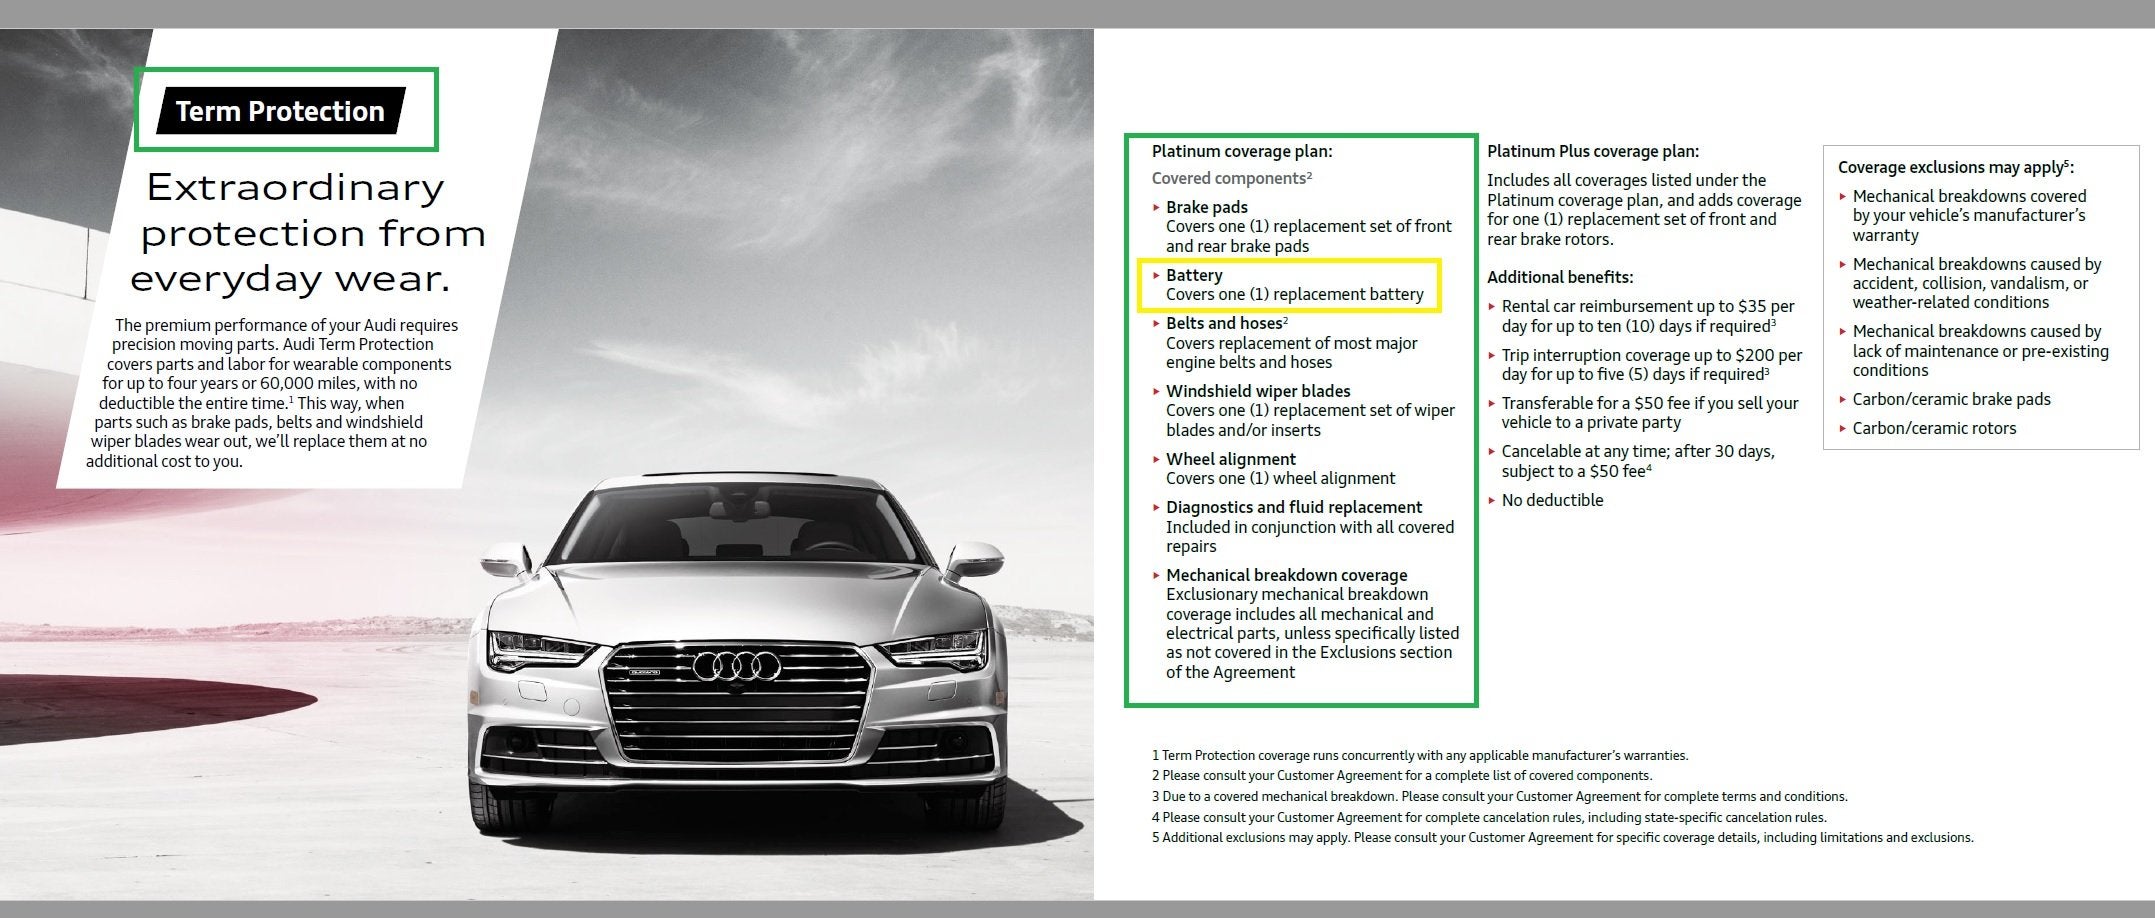 Audi Pure Protection Warranty Challenges